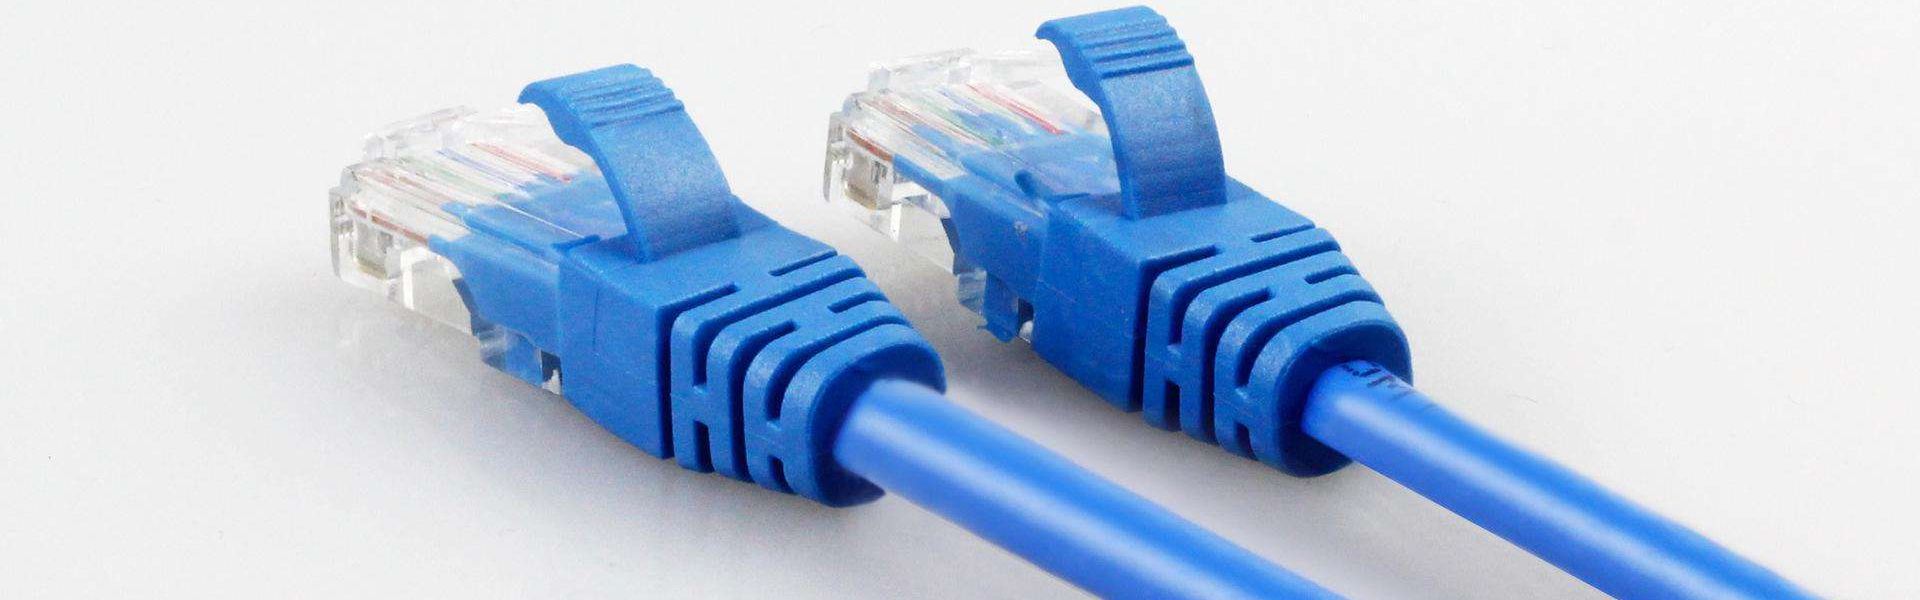 Homepage slide show good qulity RJ45 LAN cable from china